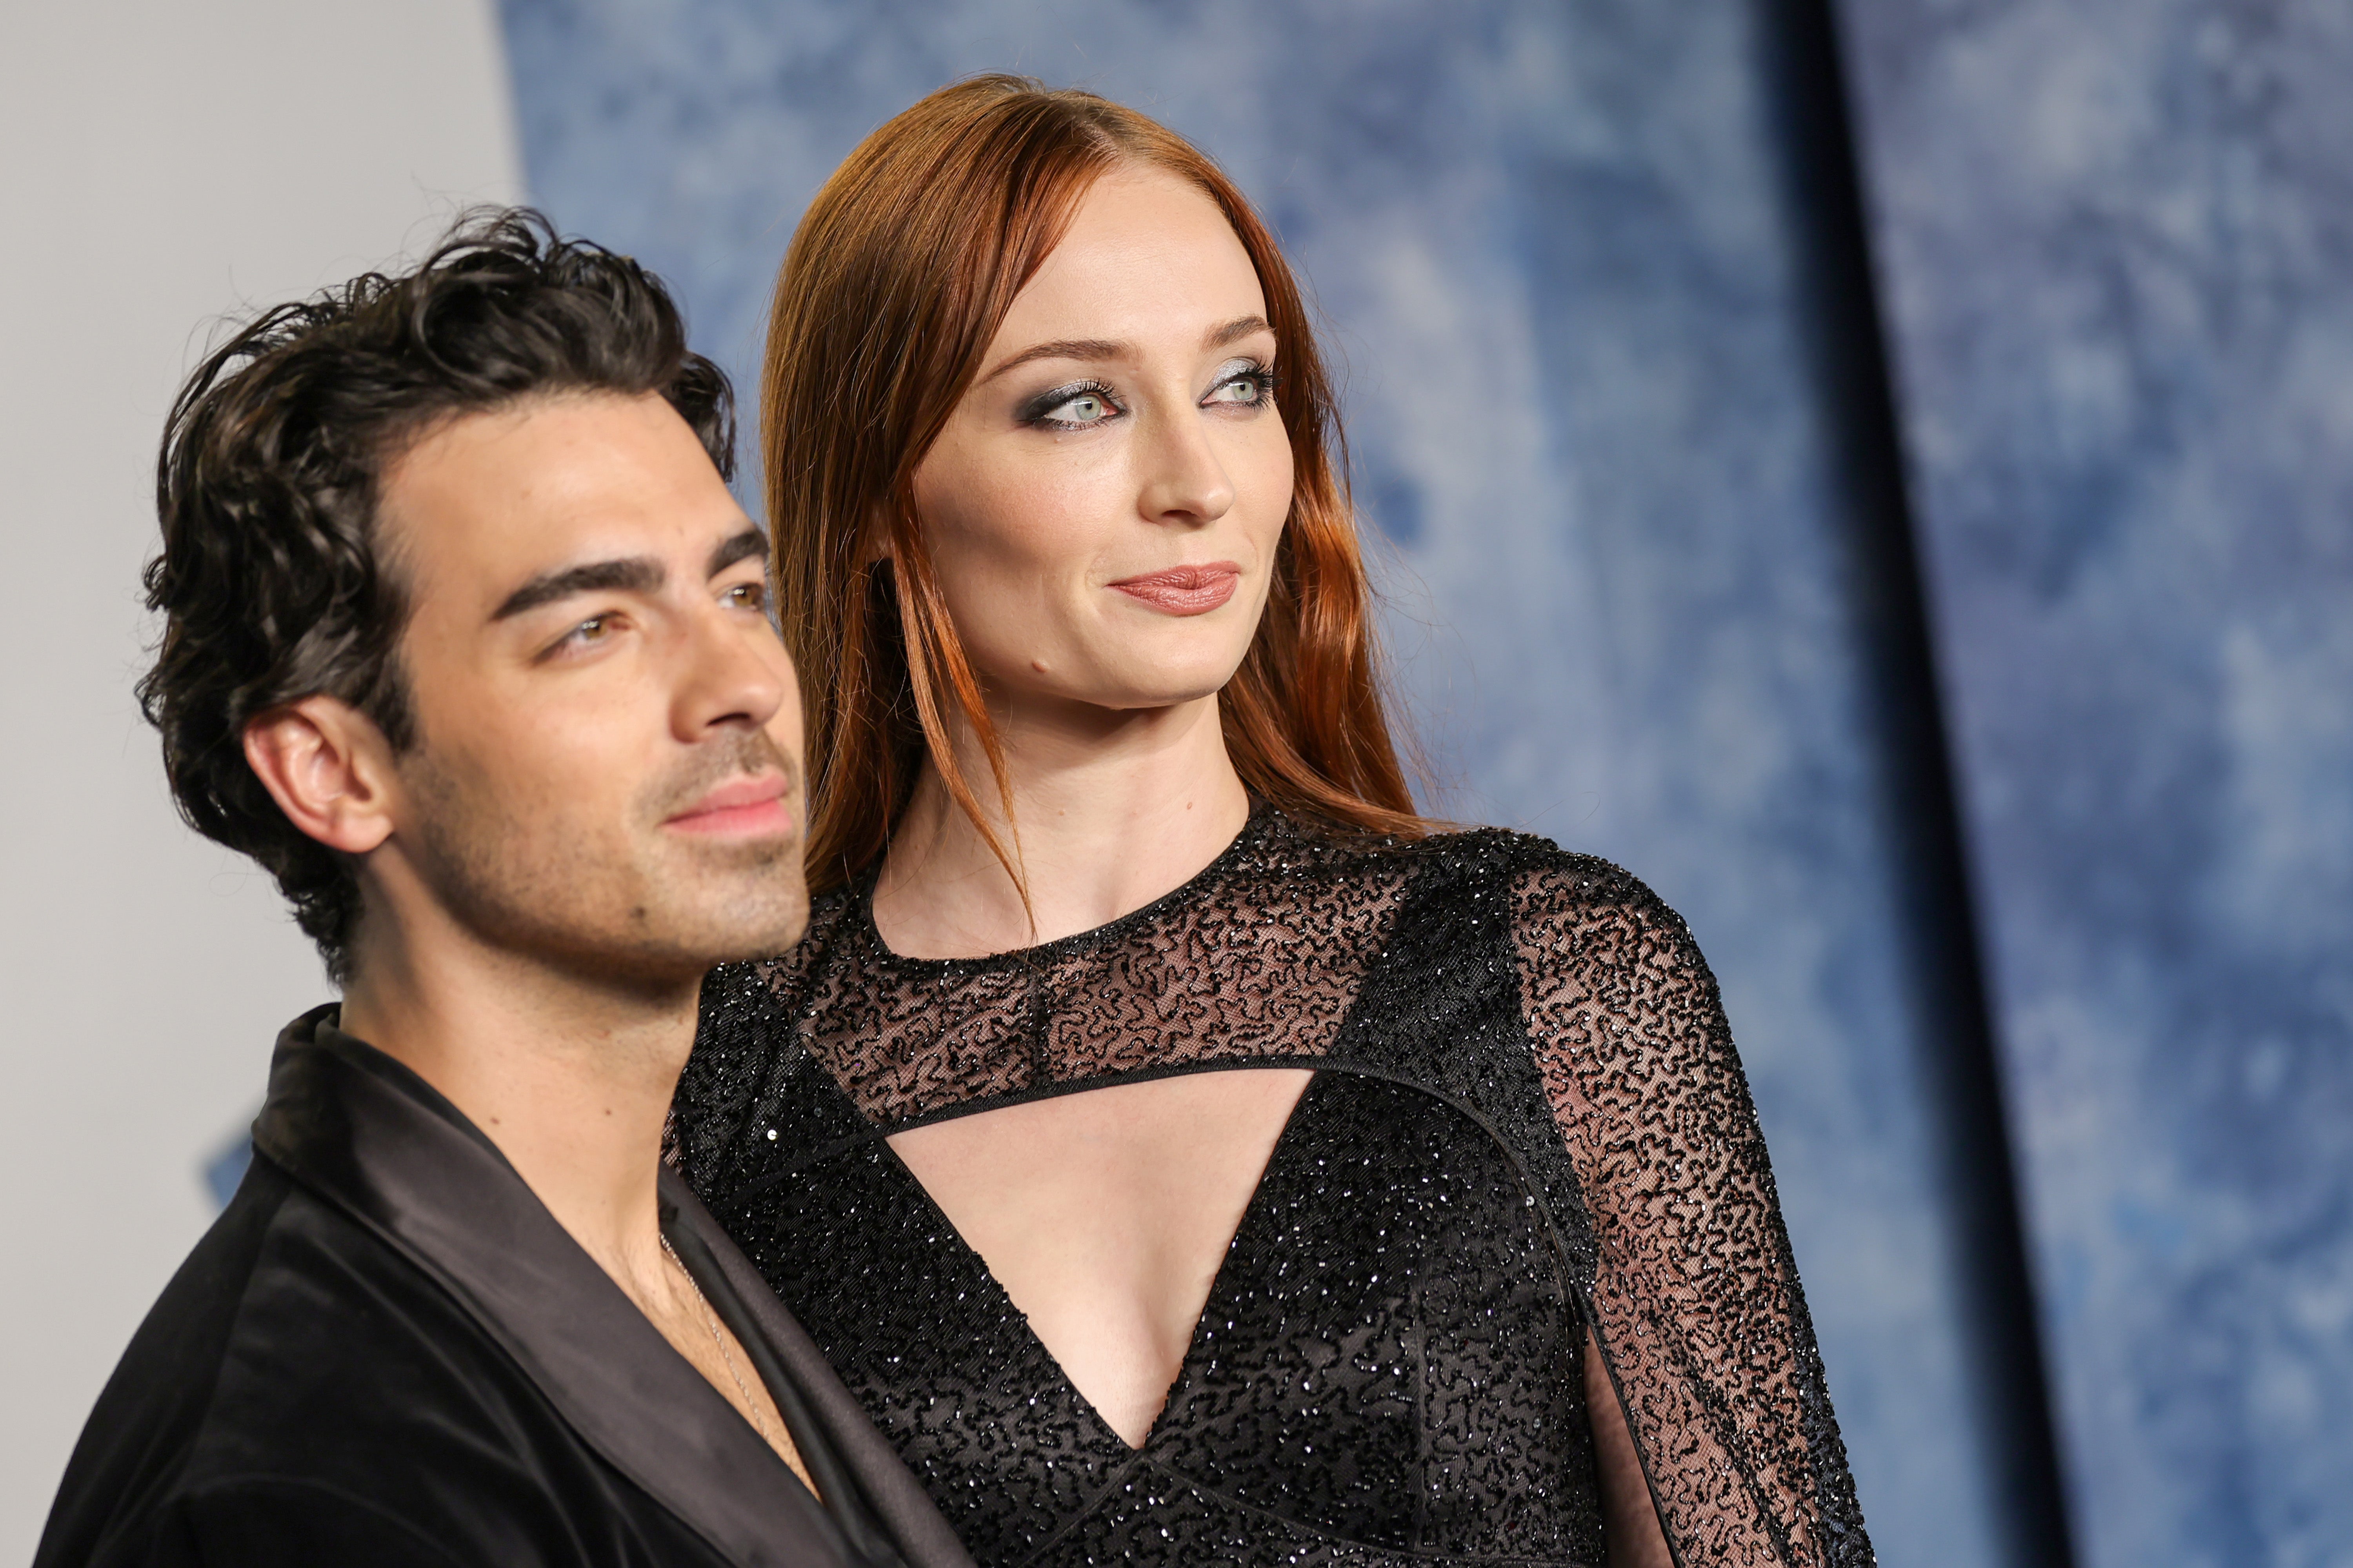 The unhappy couple: the now-former Mr and Mrs Jonas, Sophie Turner and Joe Jonas